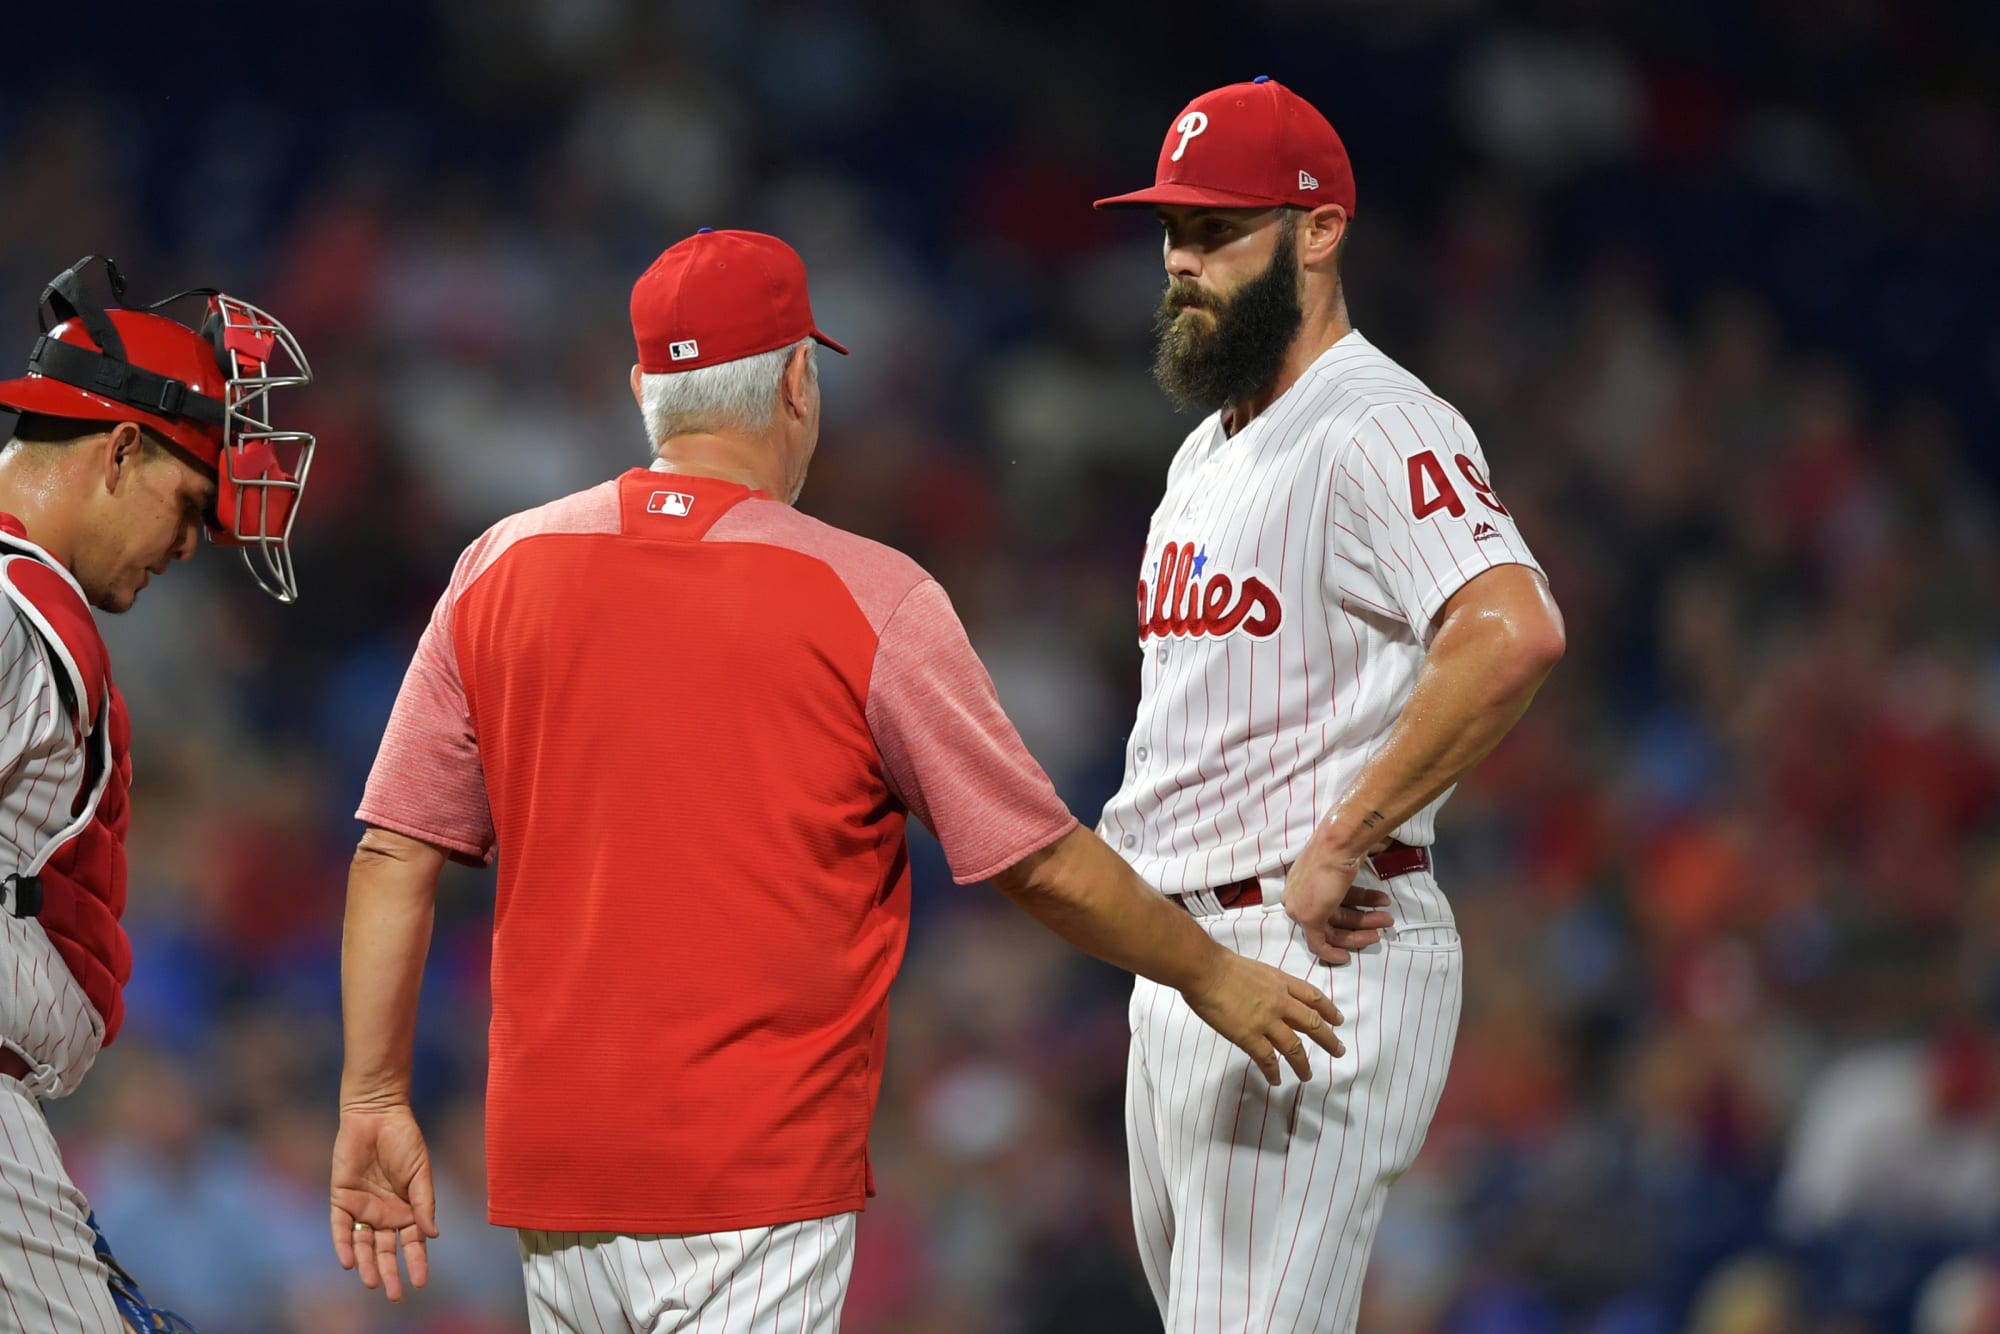 Phillies rotation is not the consistent unit it once was